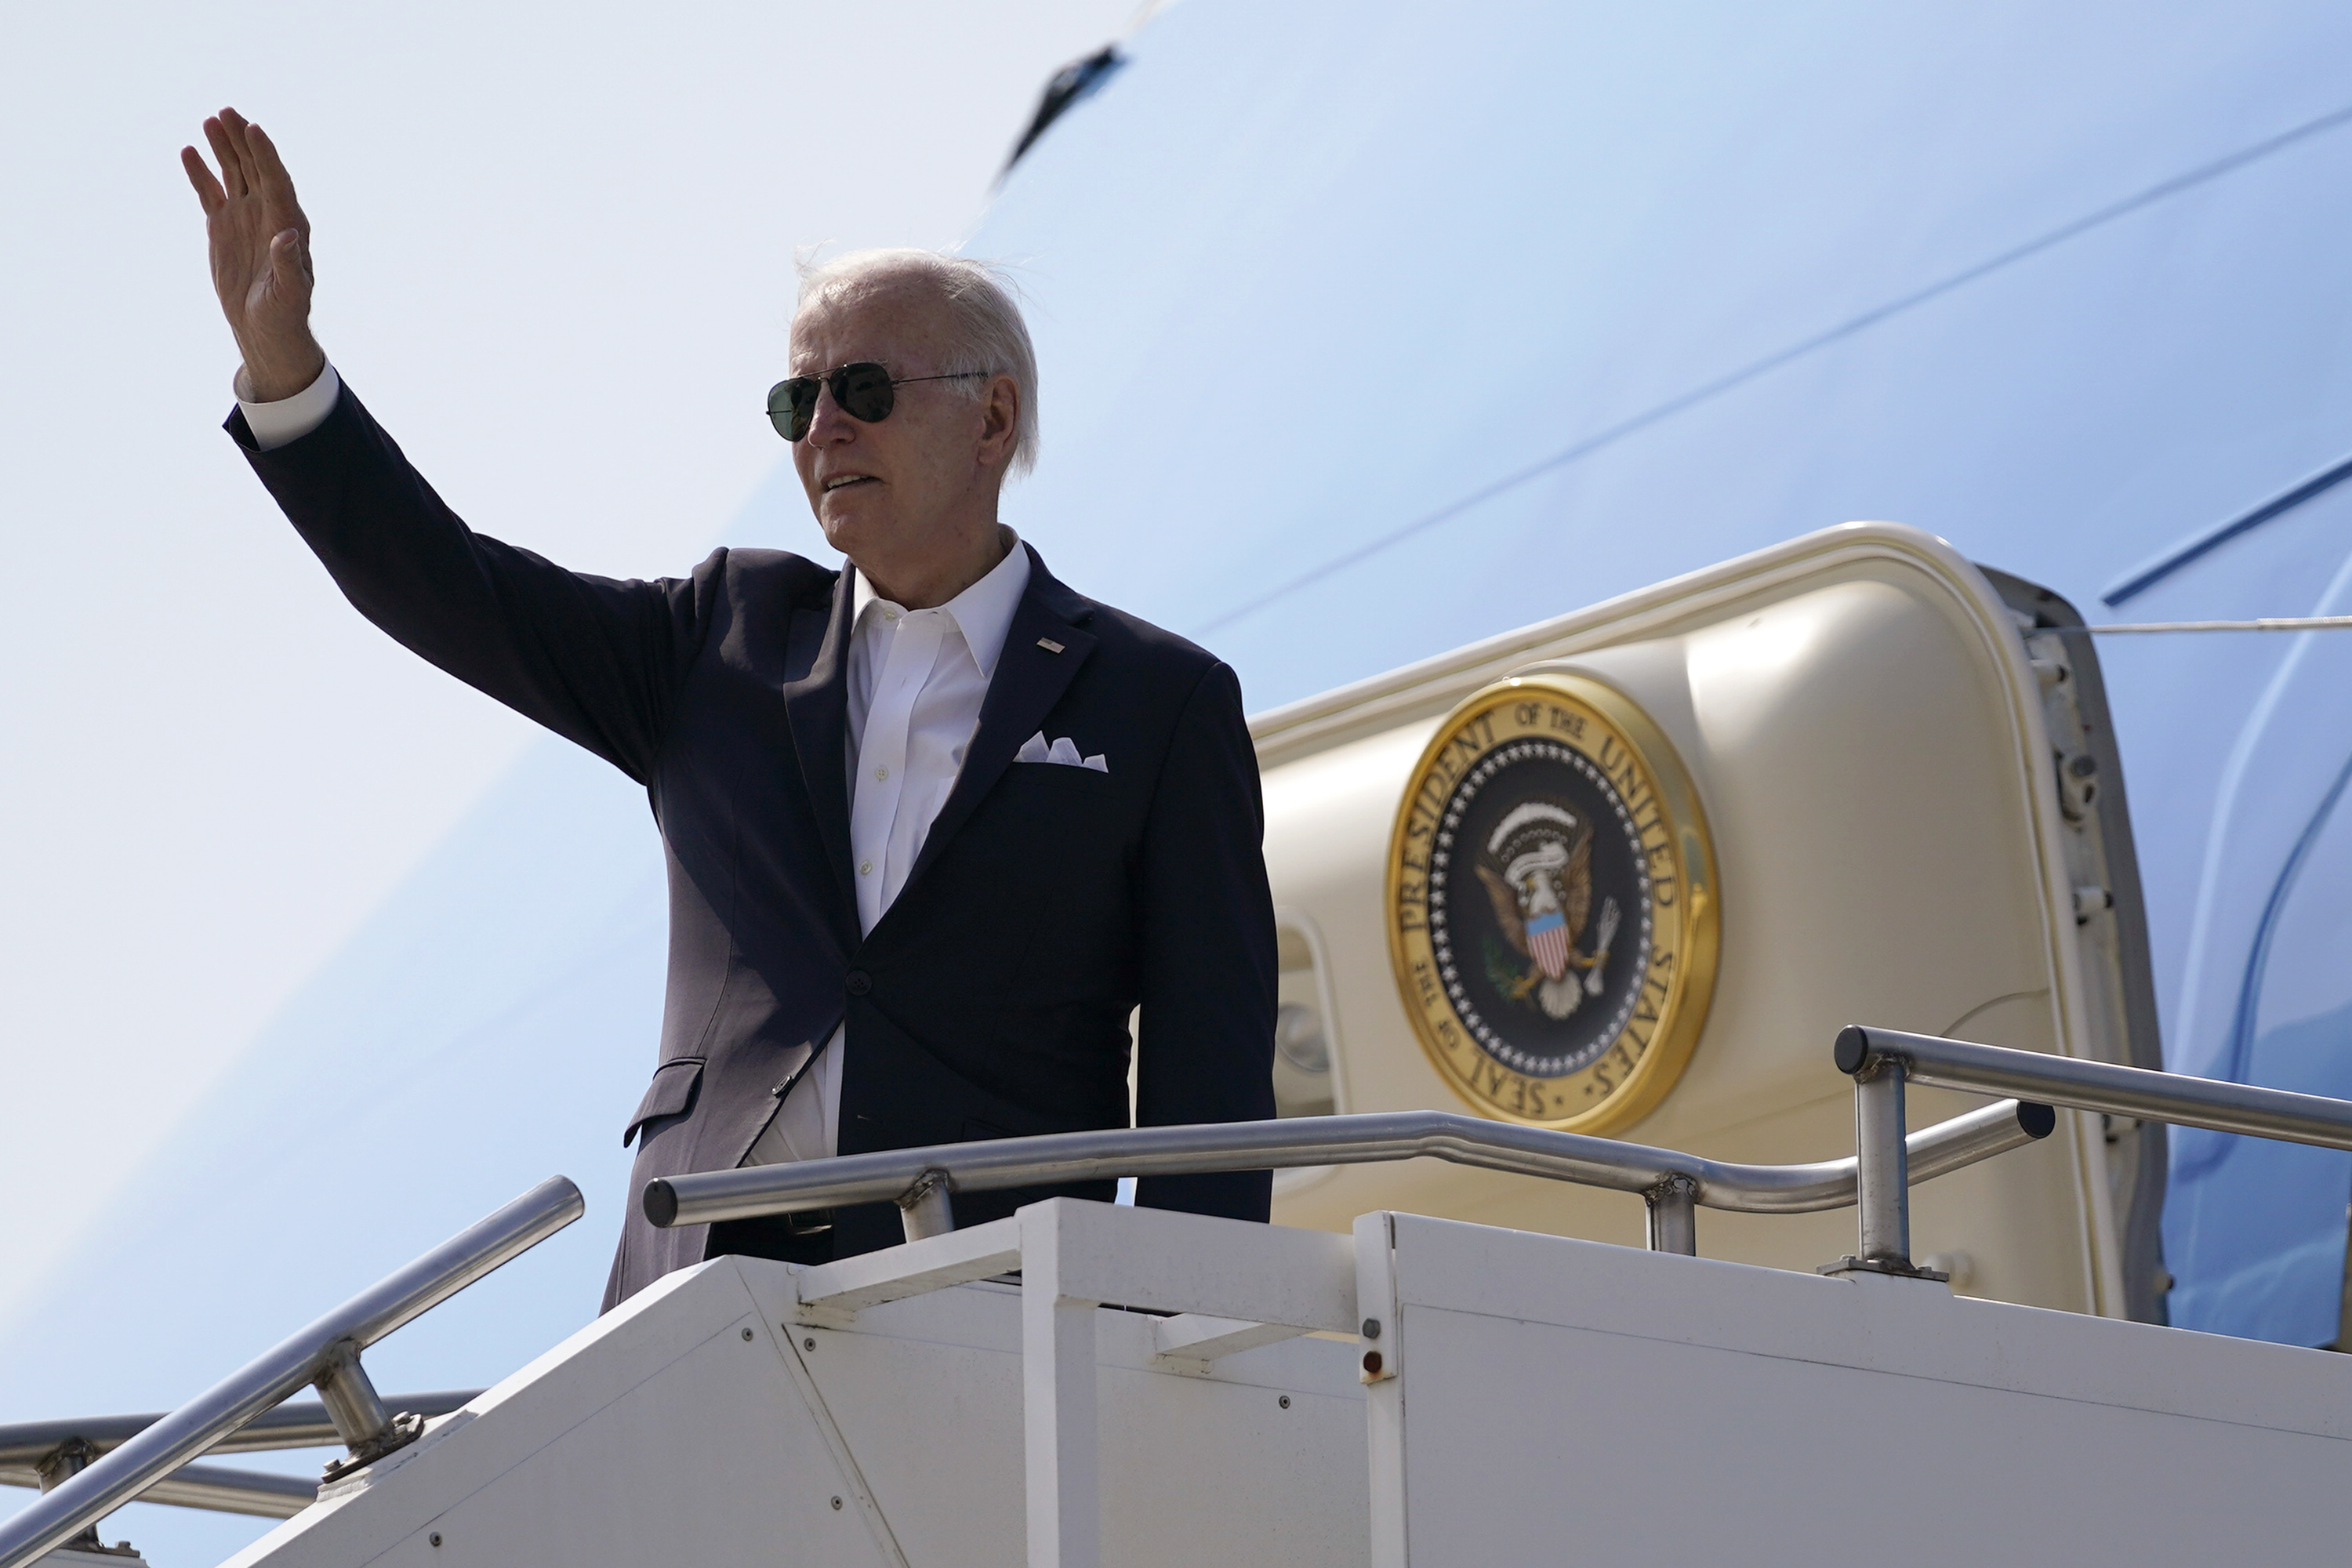 US President Joe Biden arrives in Japan on May 22. He will have a separate one-on-one meeting with Indian Prime Minister Narendra Modi on the sidelines of the Quad summit.